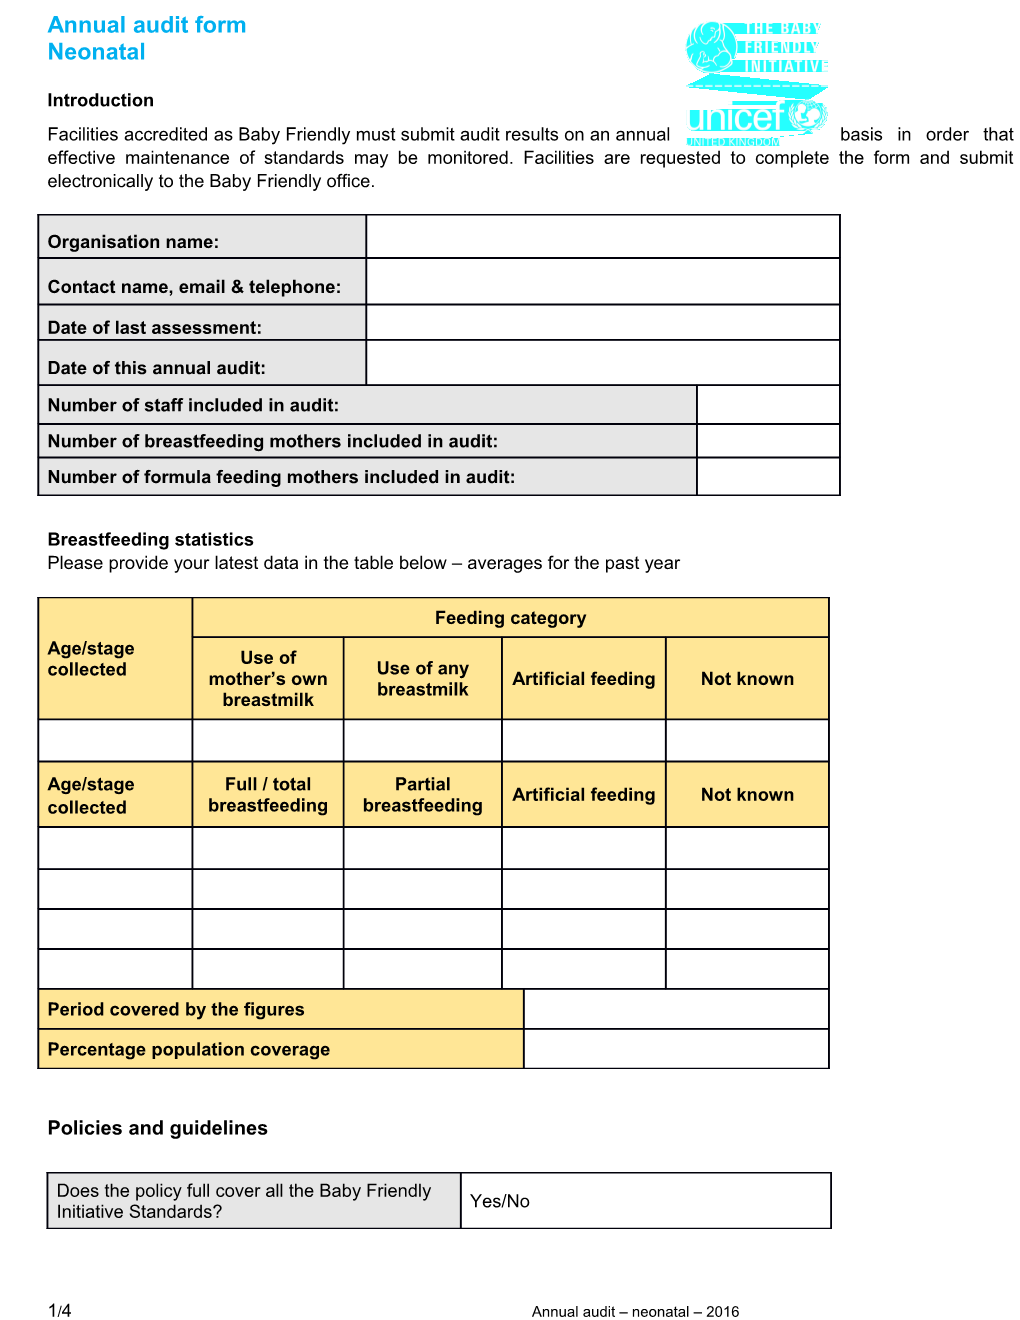 Annual Audit Form - Maternity